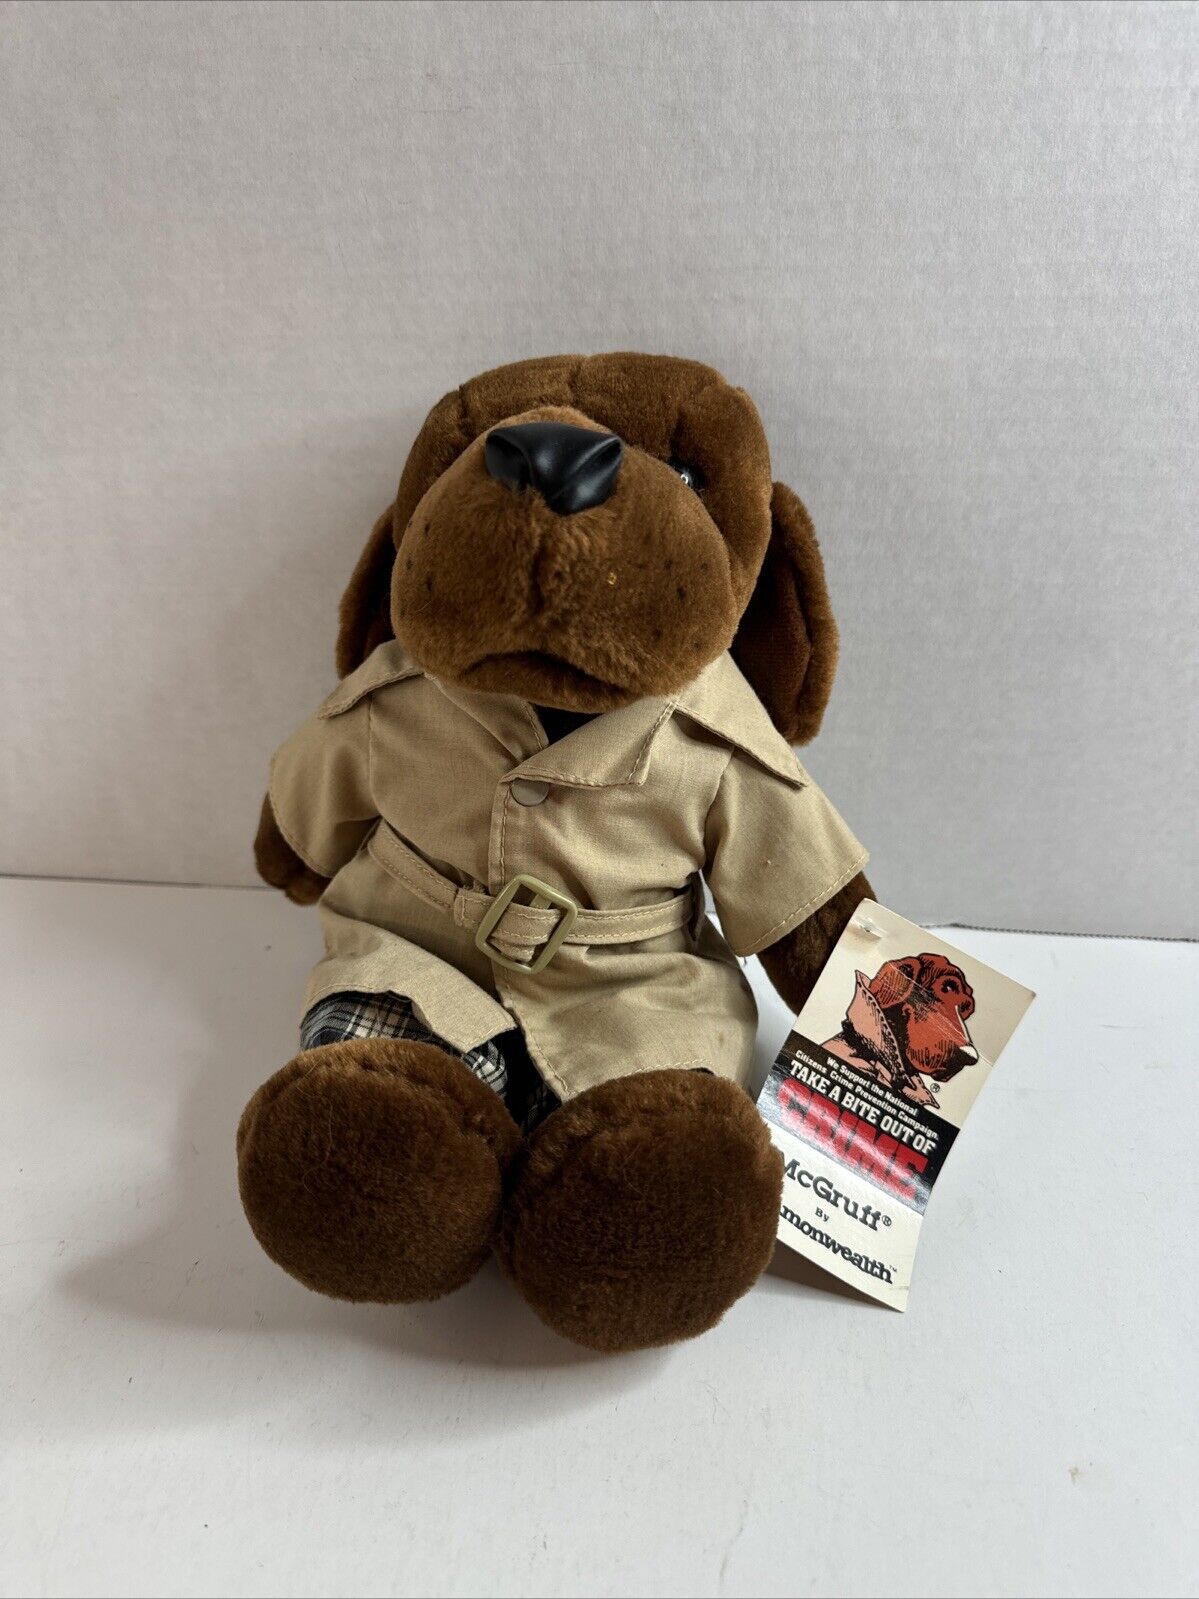 McGruff The Crime Dog Vintage Plush 11” Commonwealth Toy 1989 with NWT